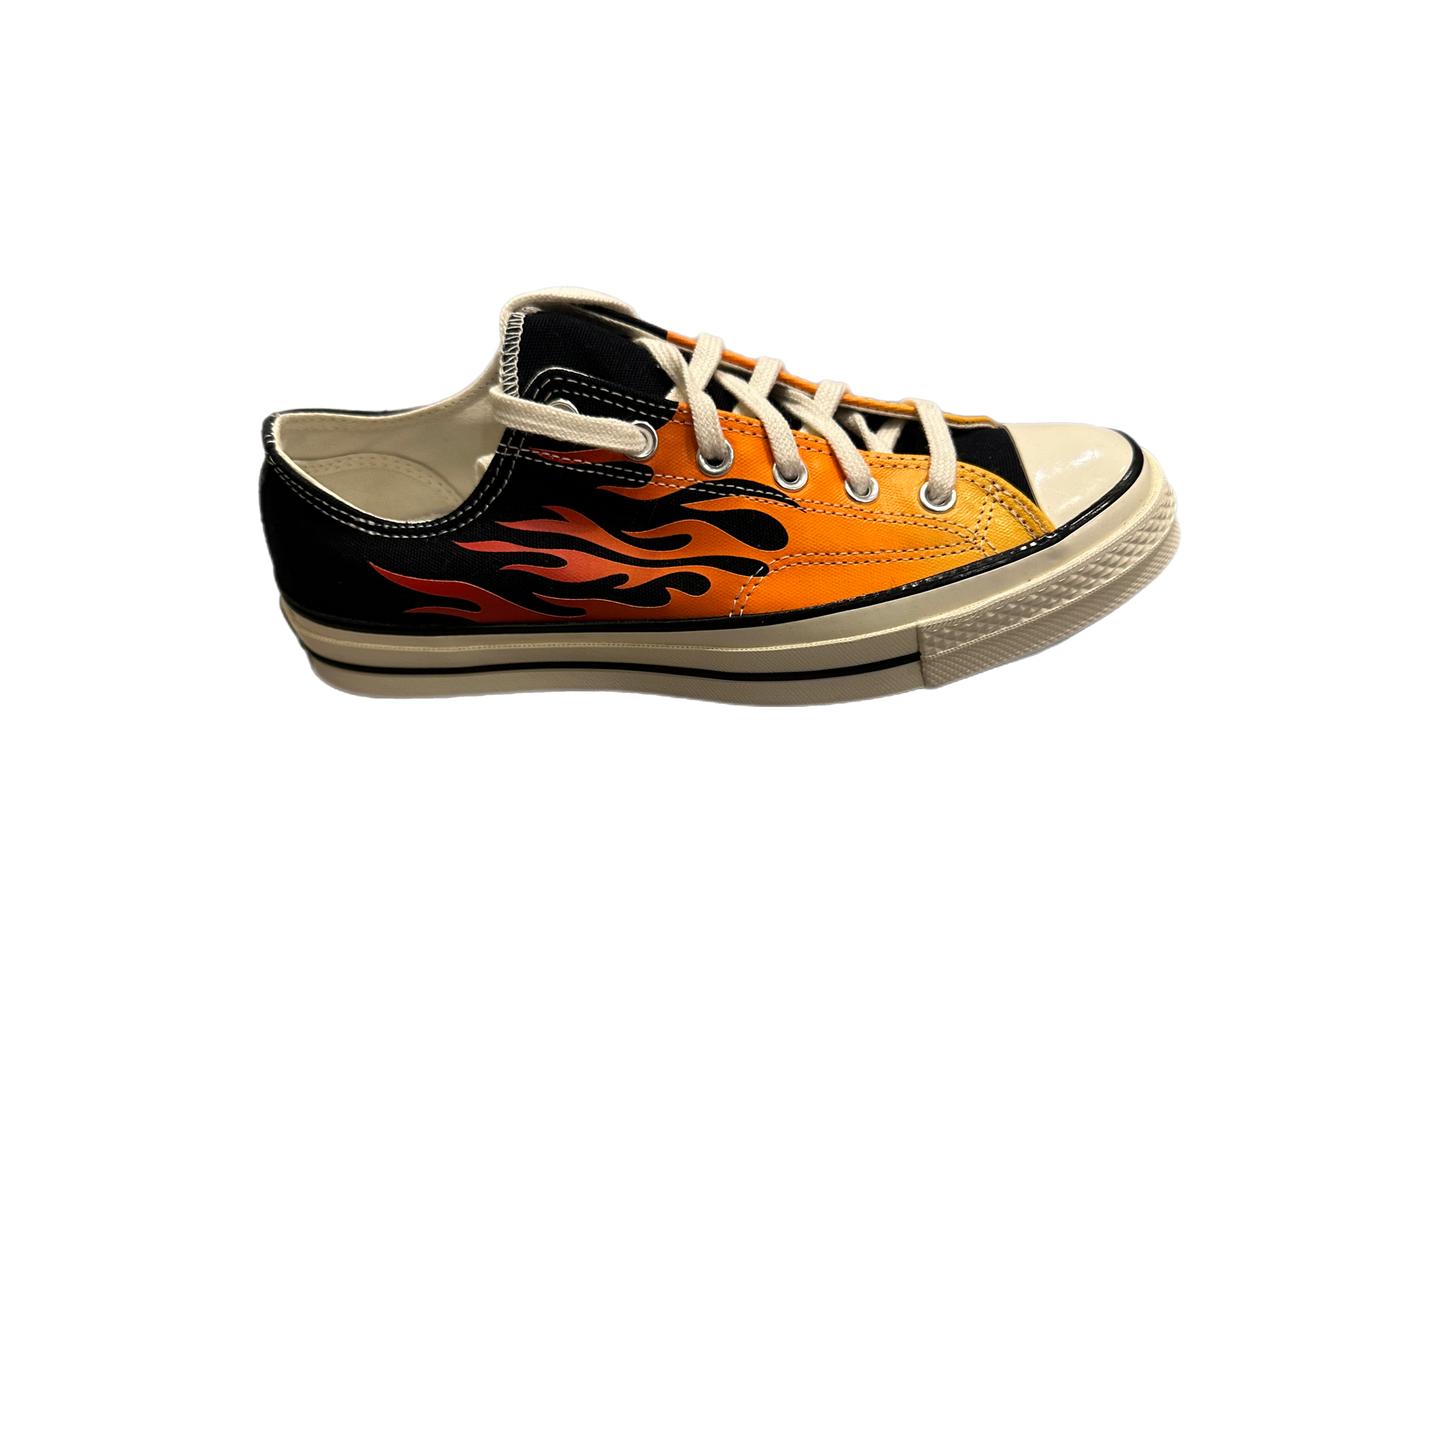 Converse - "Flame Low" - Size 8